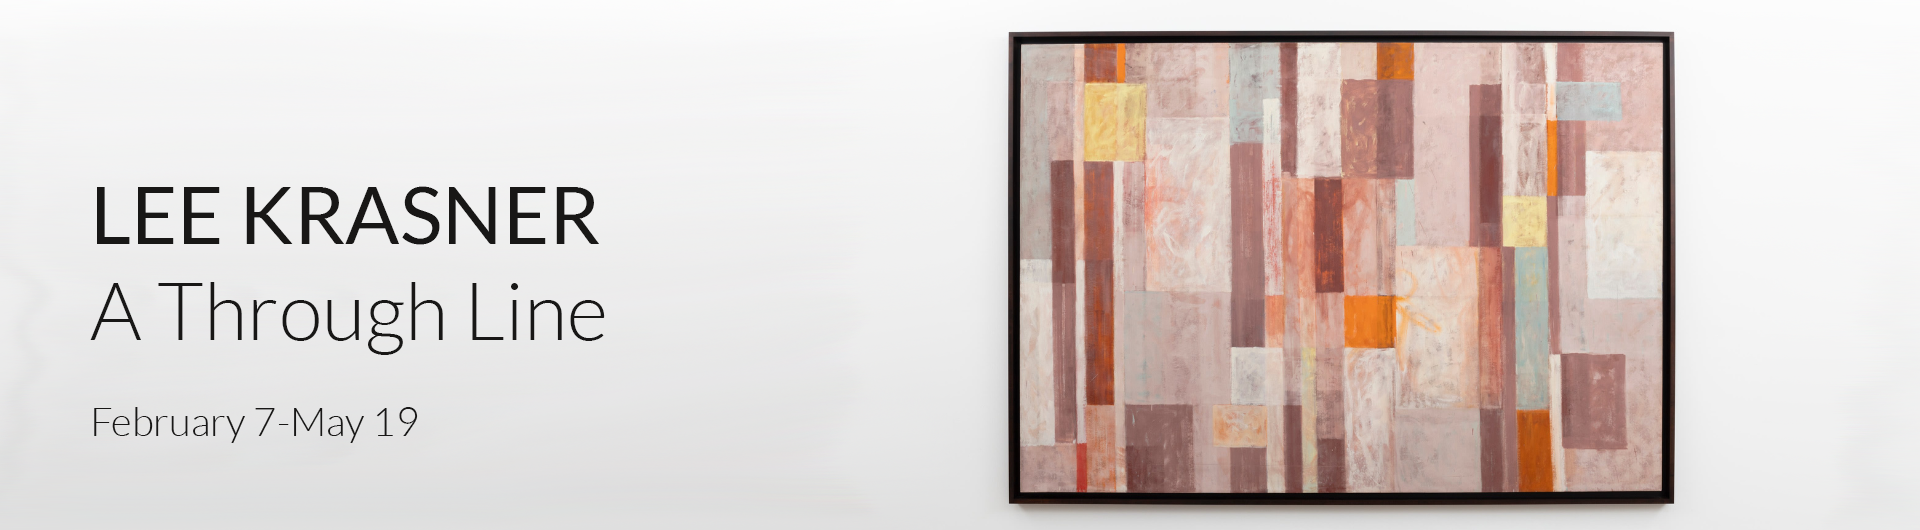 Lee Krasner: A through Line exhibition preview banner - feat painting No. 2 showing geometric abstraction with neutral warm tones and rectangular shapes